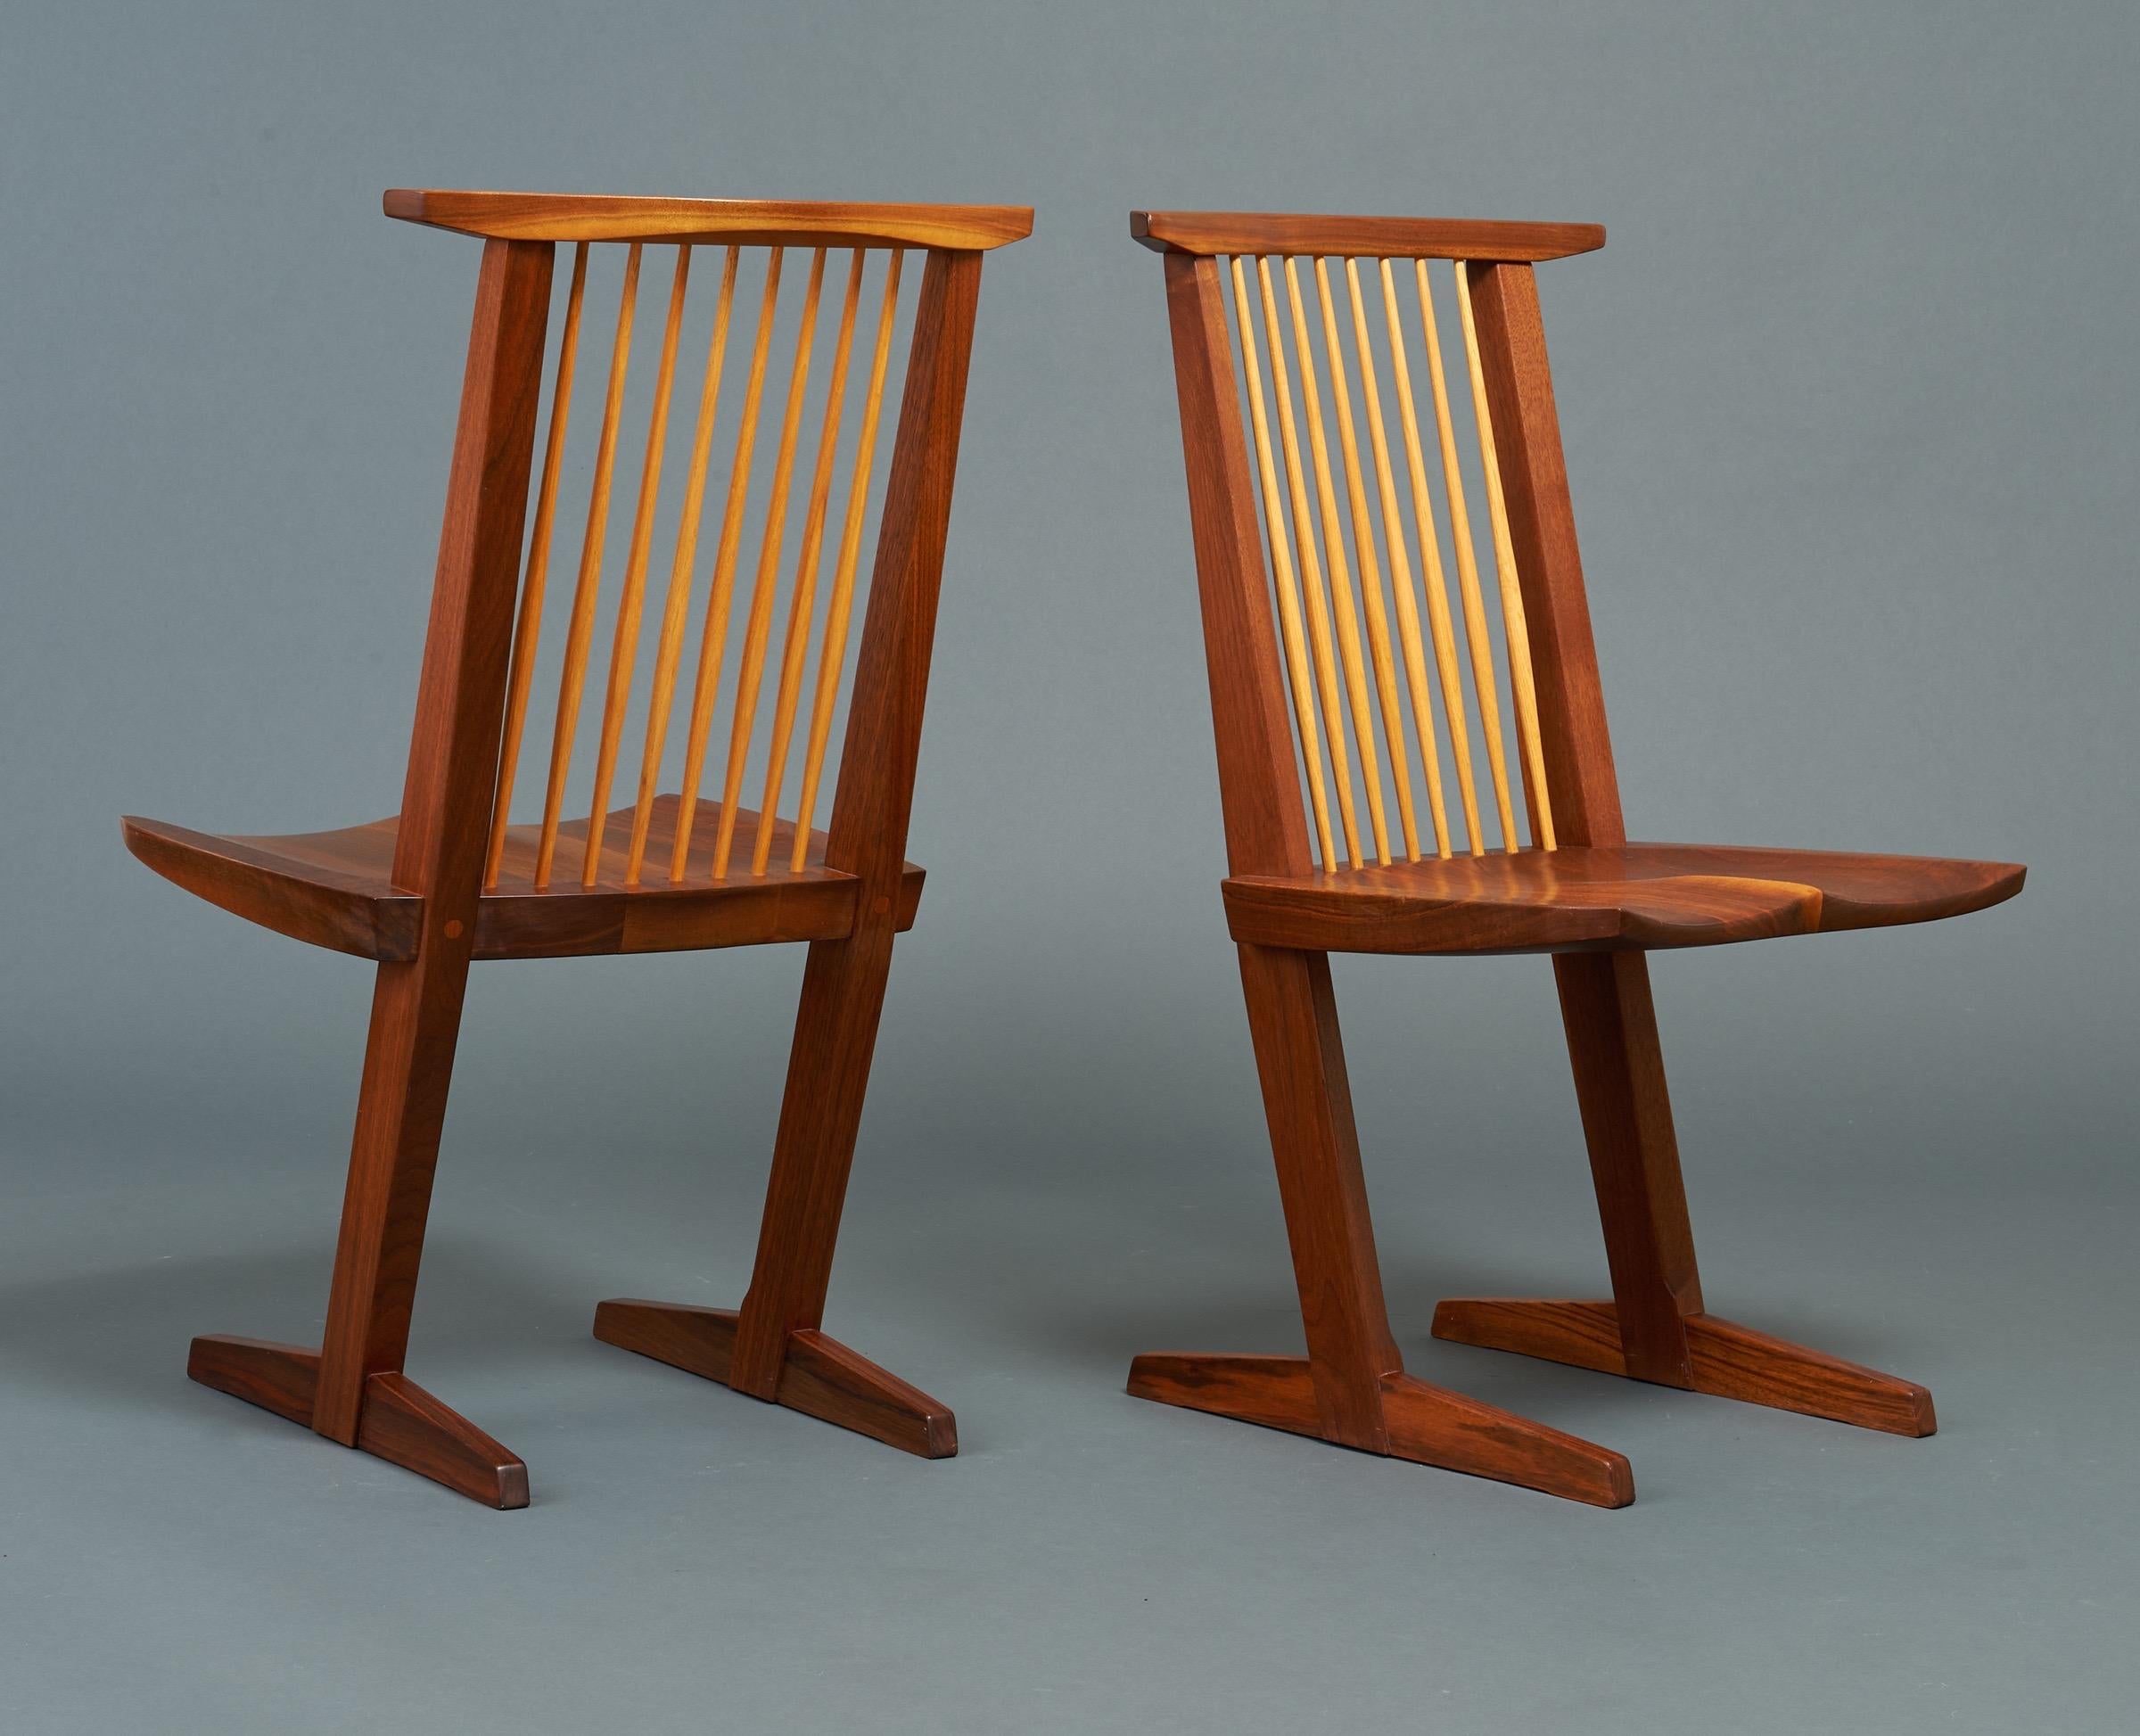 20th Century George Nakashima, Rare Sculptural Pair of Conoid Chairs in Walnut, Signed, 1989 For Sale